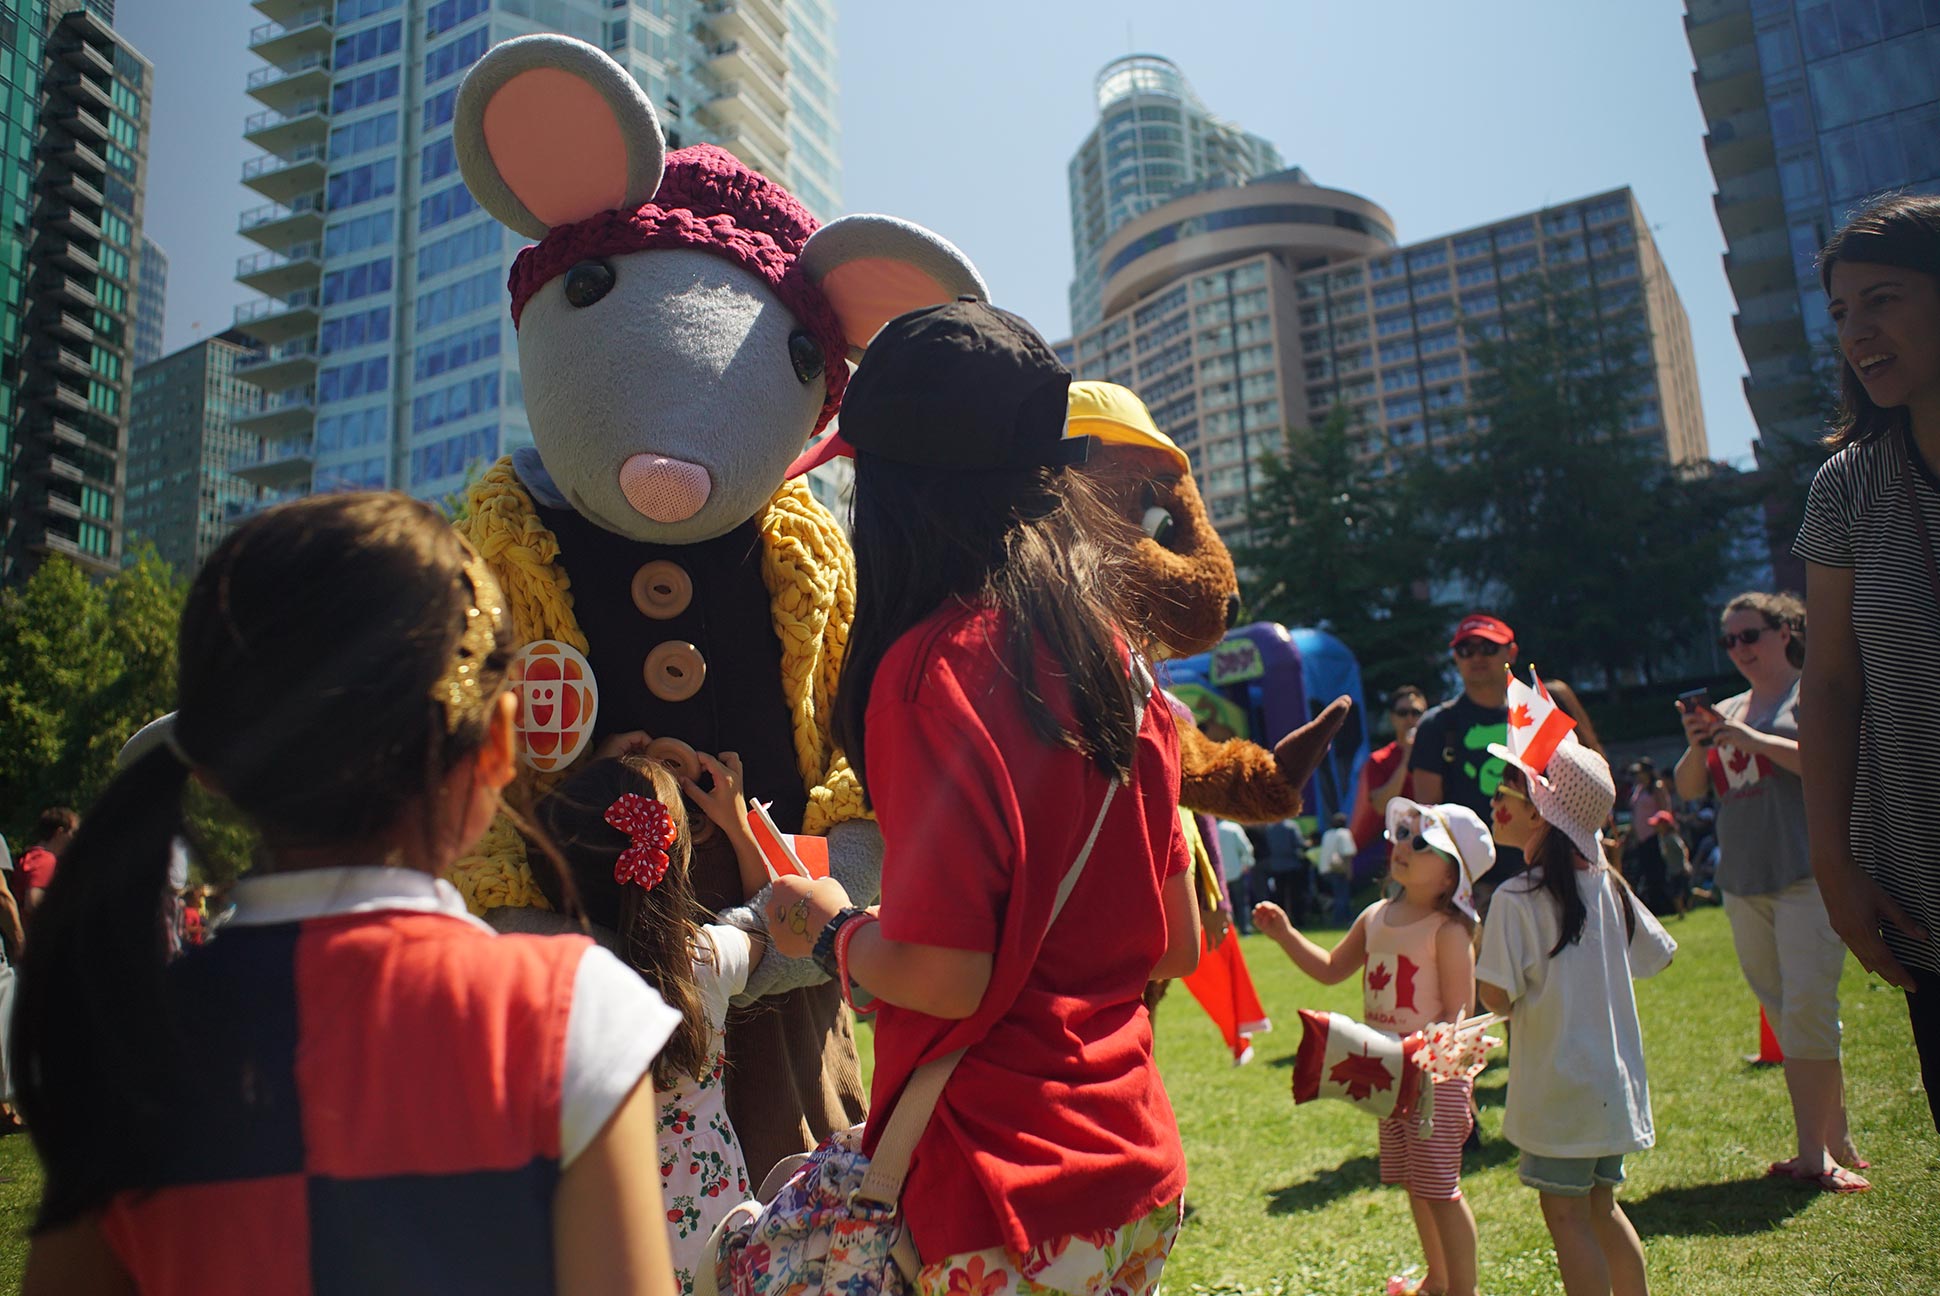 A mouse and a beaver mascot meet children in a crowd